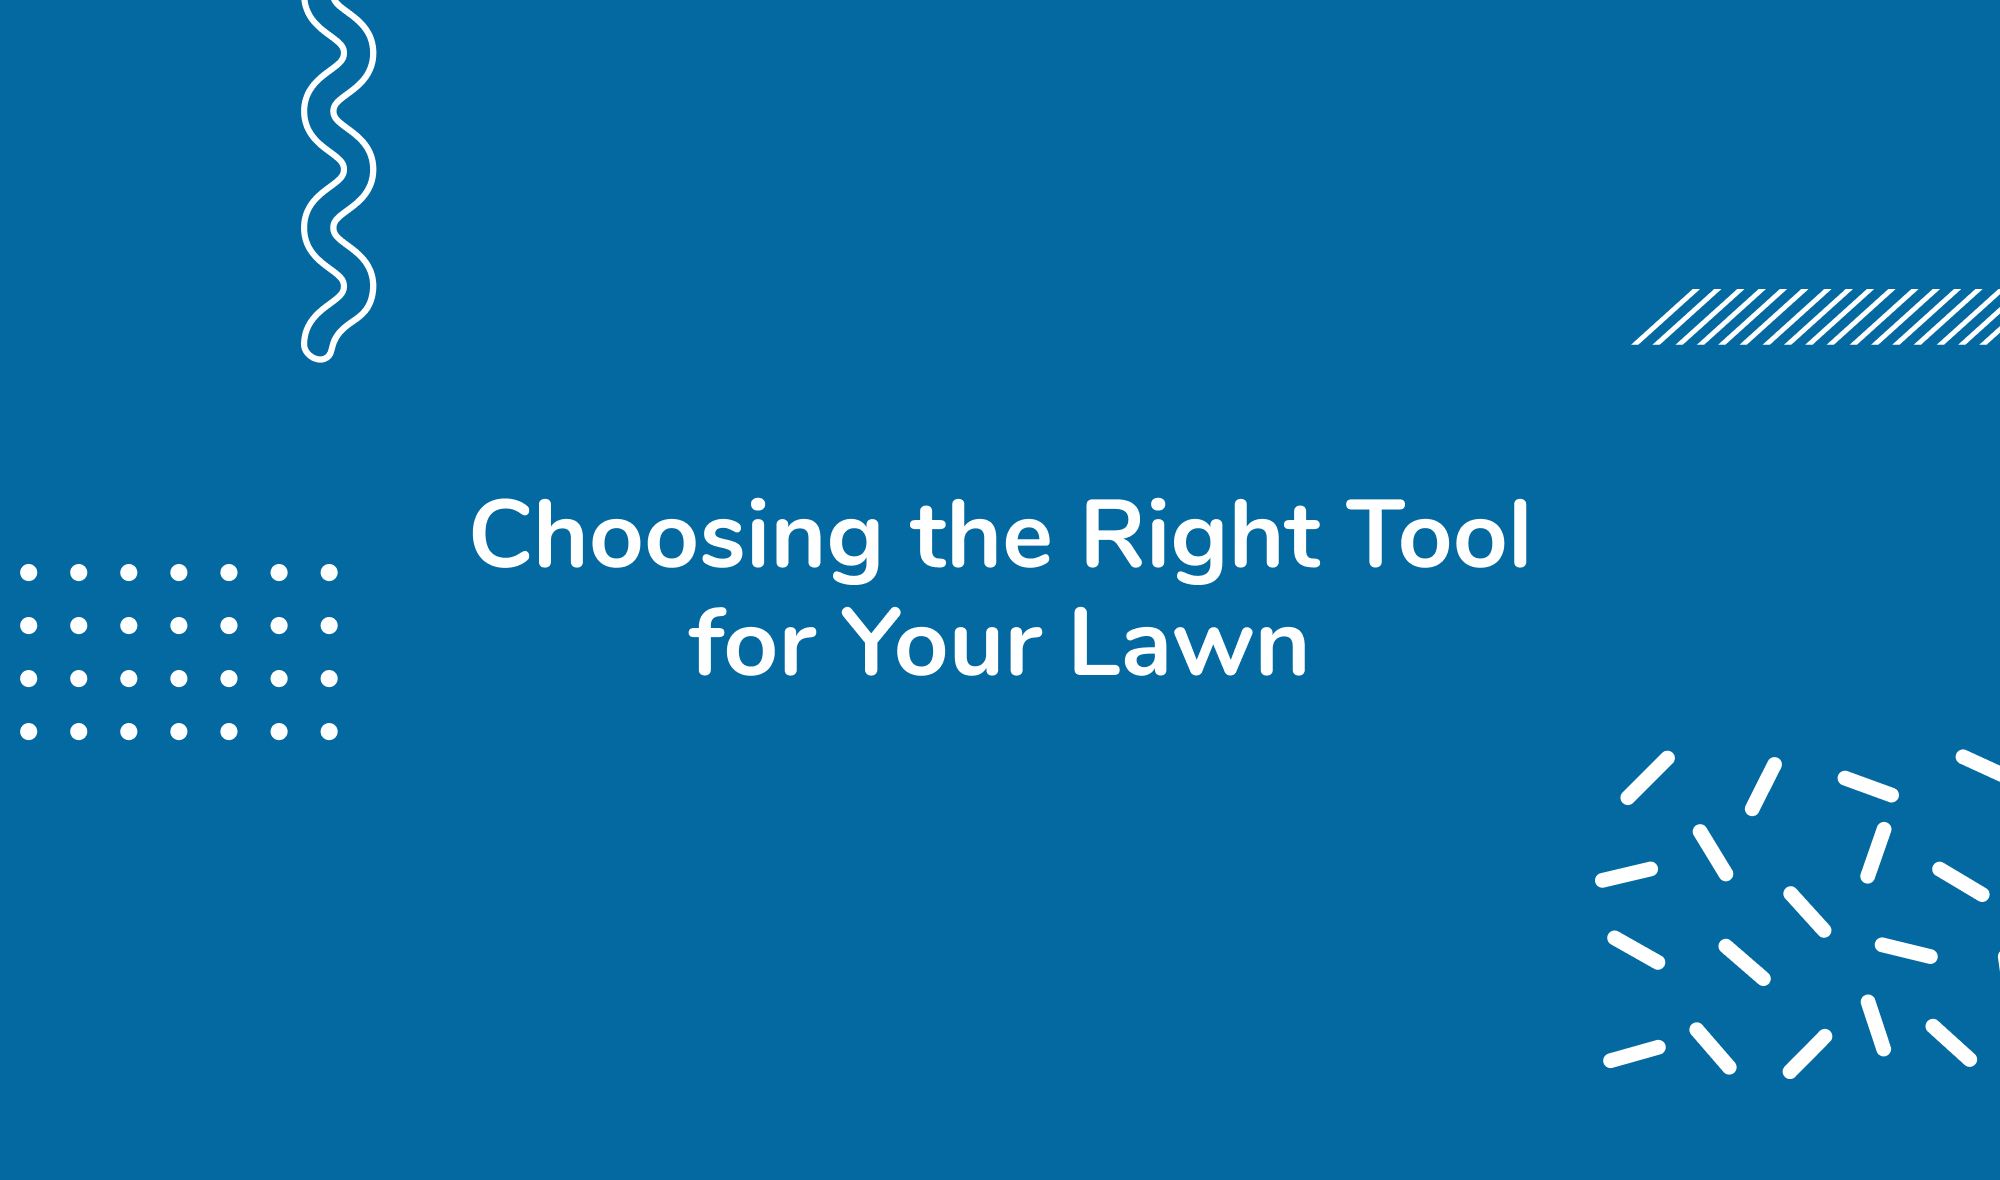 Choosing the Right Tool for Your Lawn